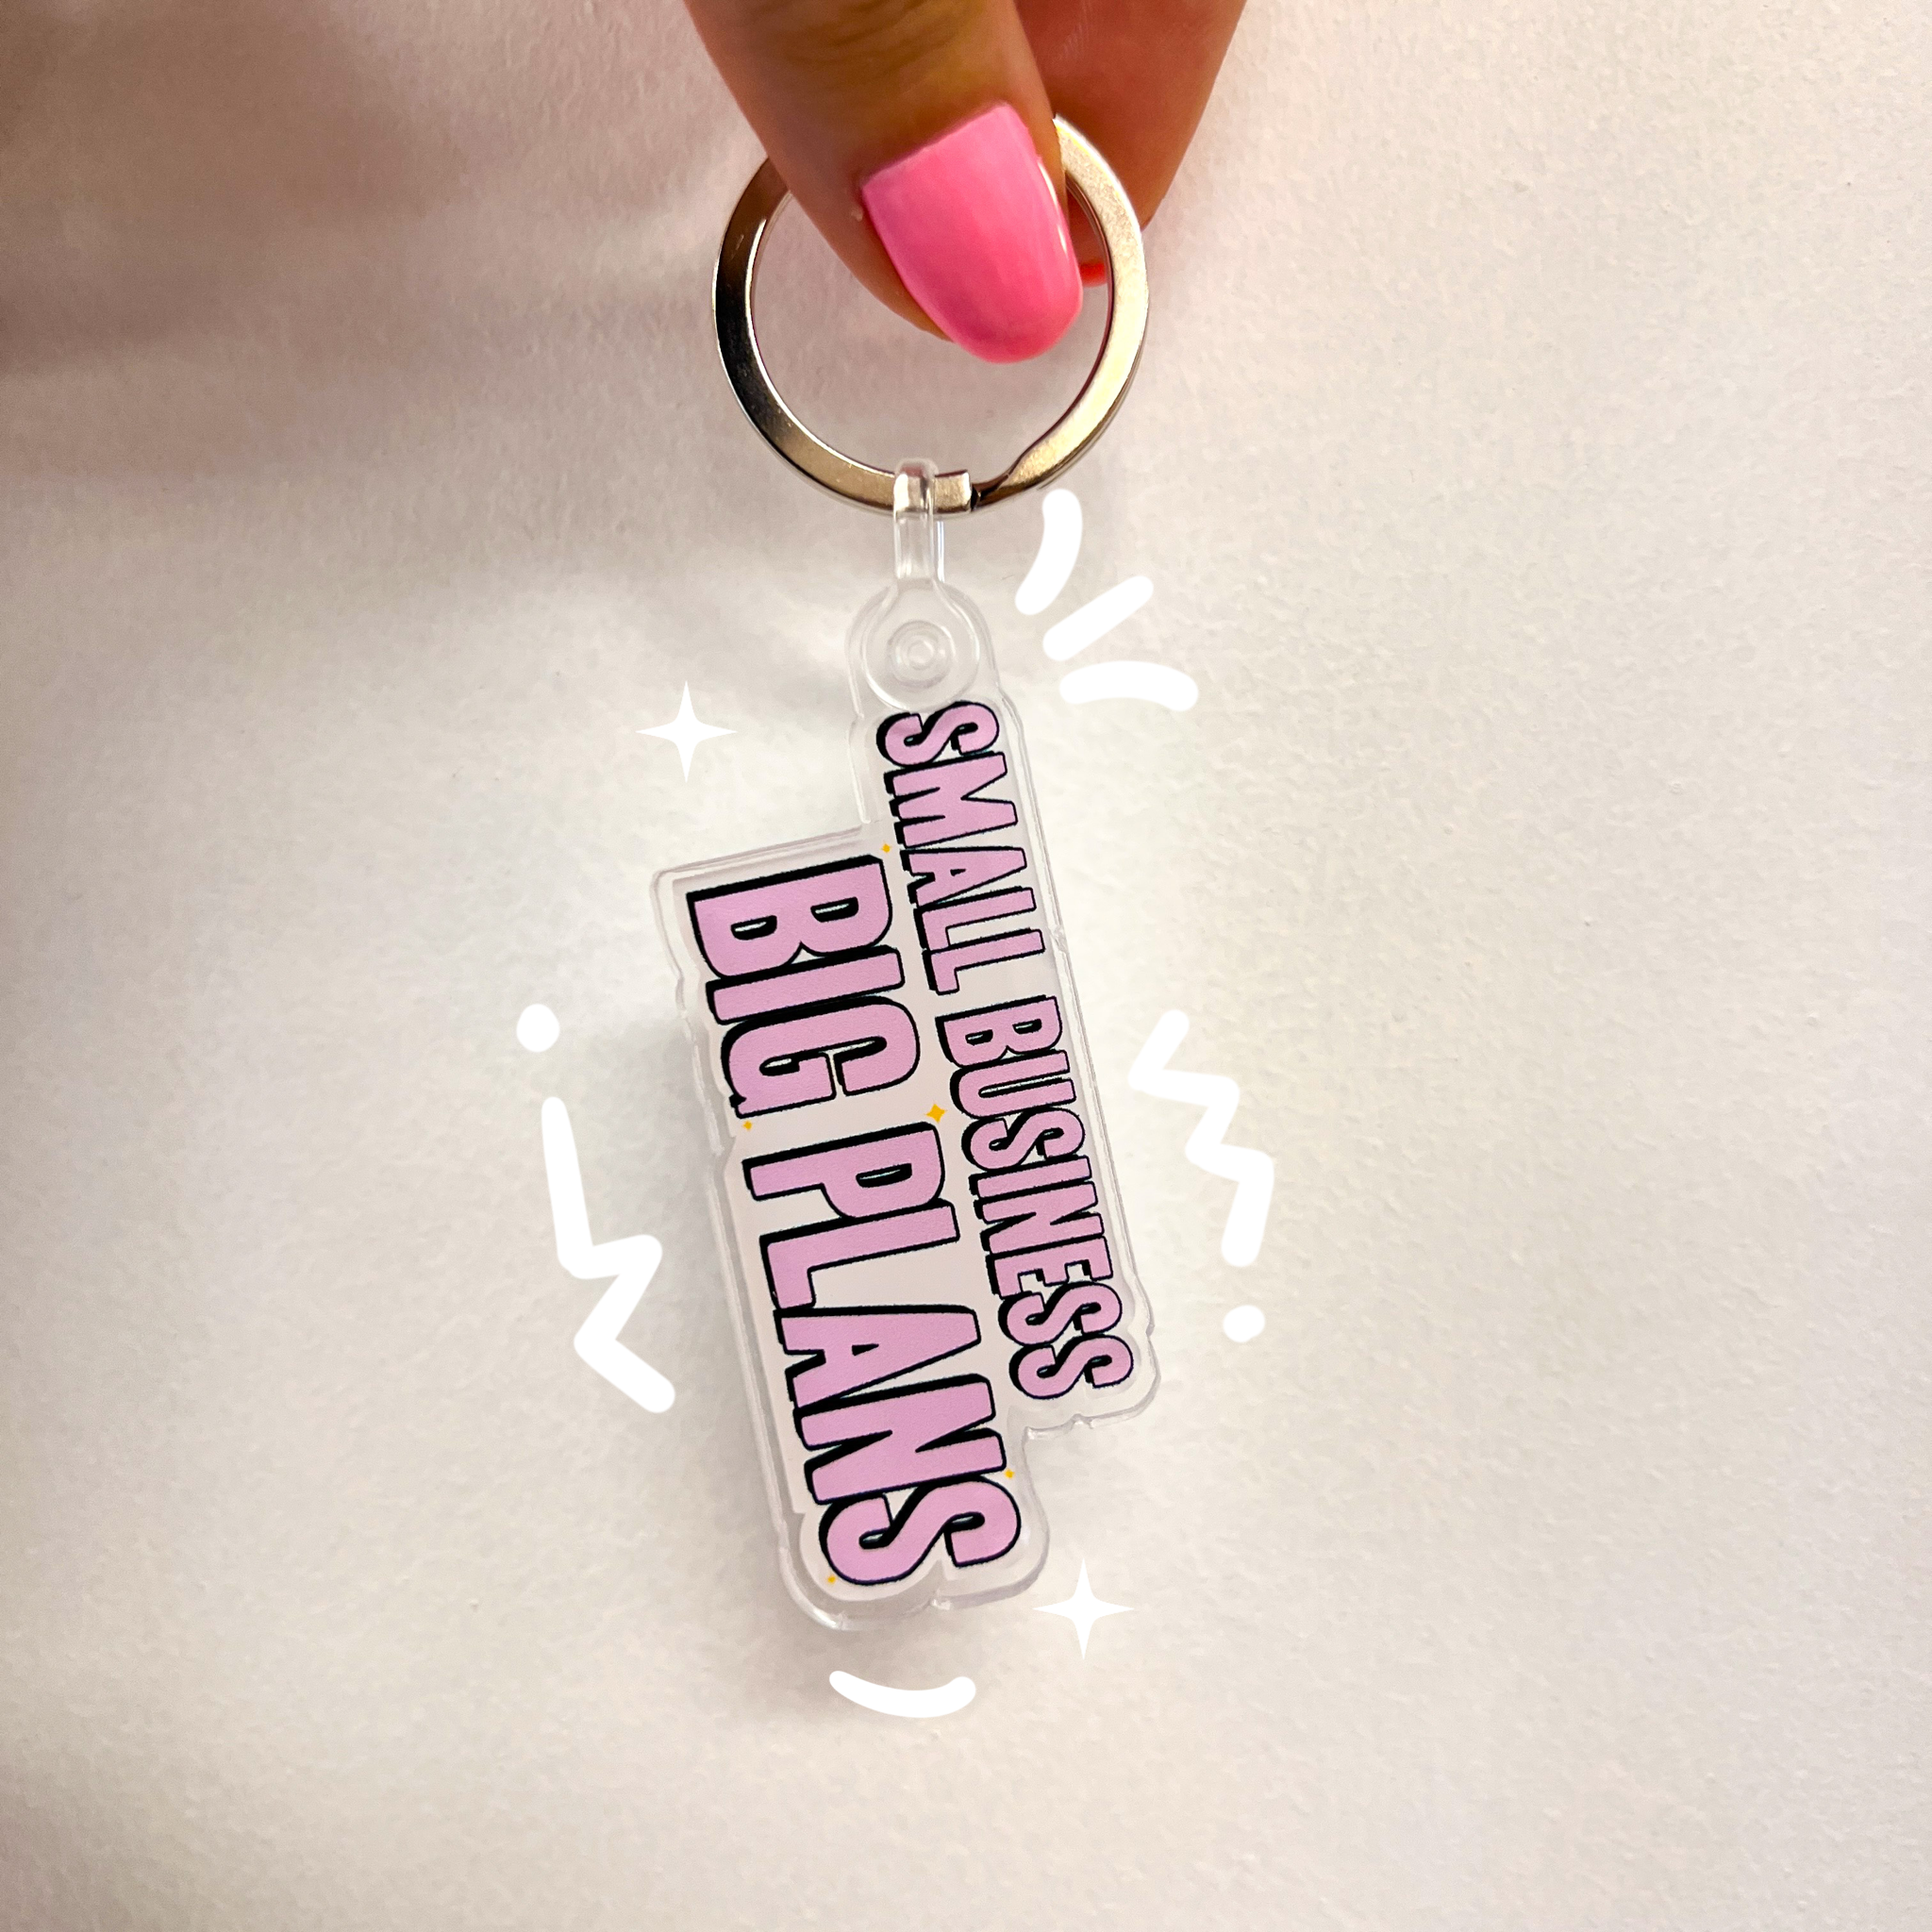 Small business big plans keychain